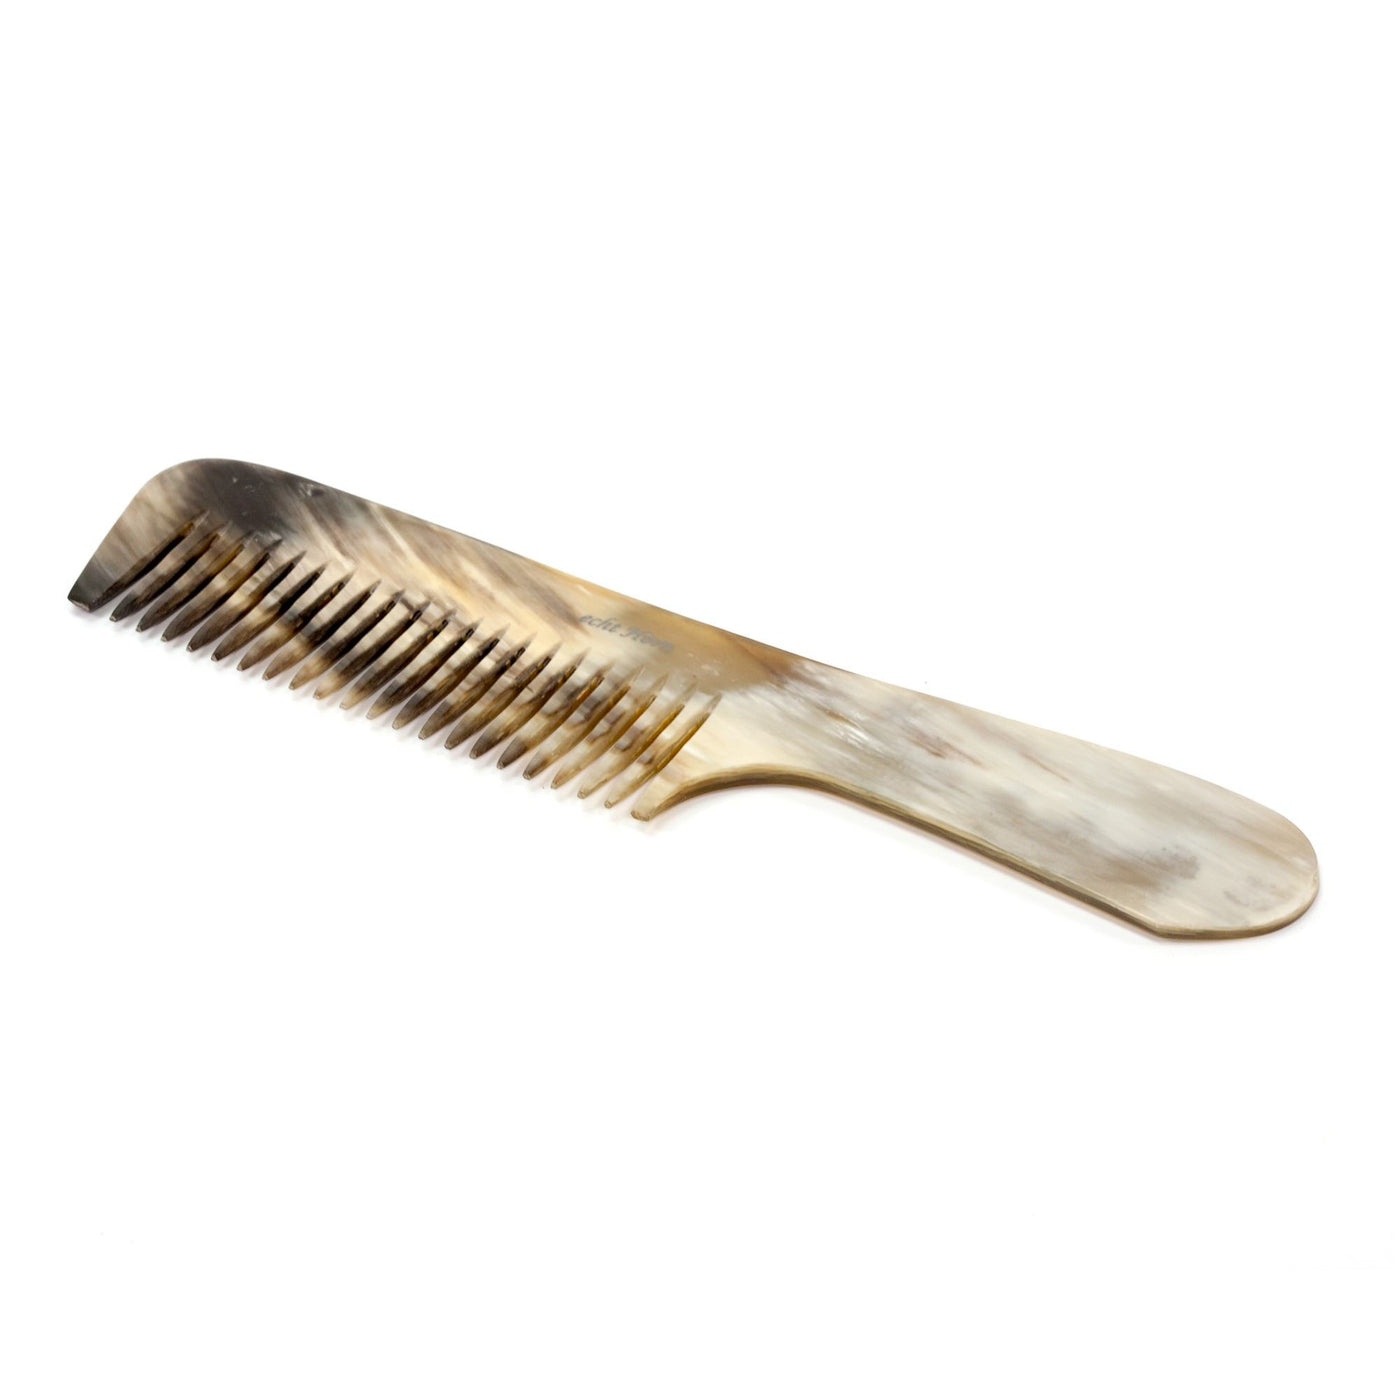 Fendrihan Fine-Tooth Horn Comb with Handle